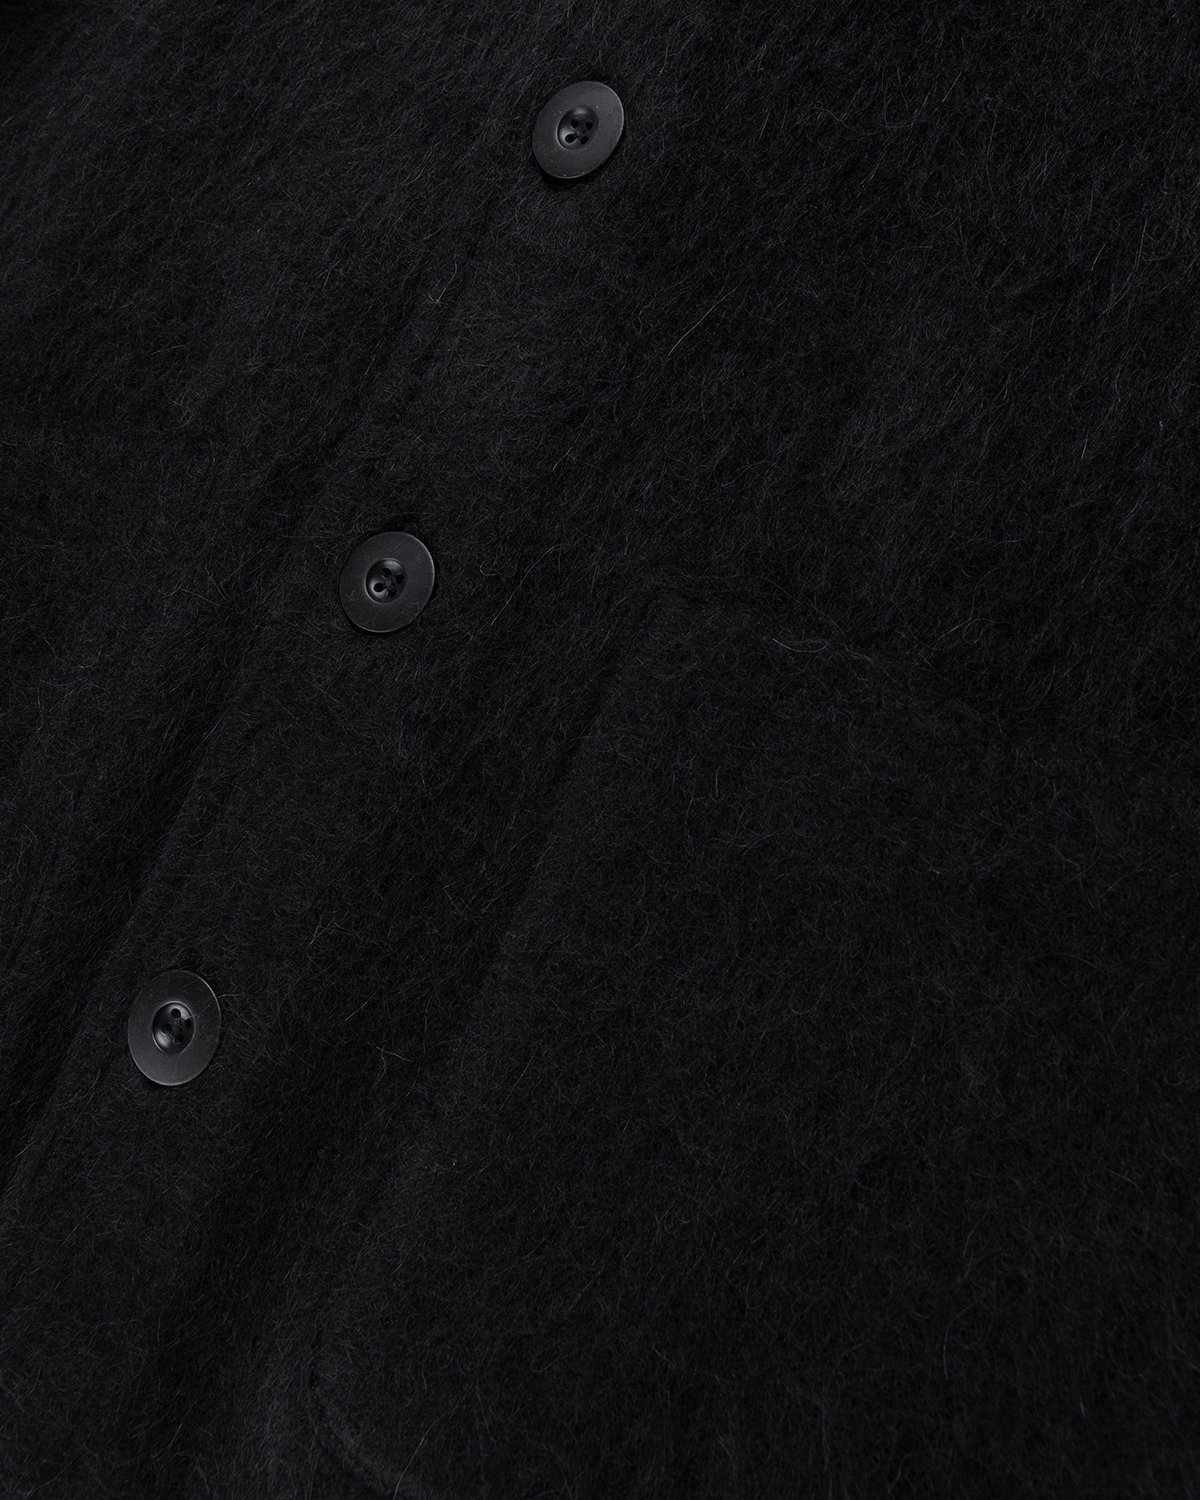 Our Legacy - Cardigan Black Mohair - Clothing - Black - Image 5